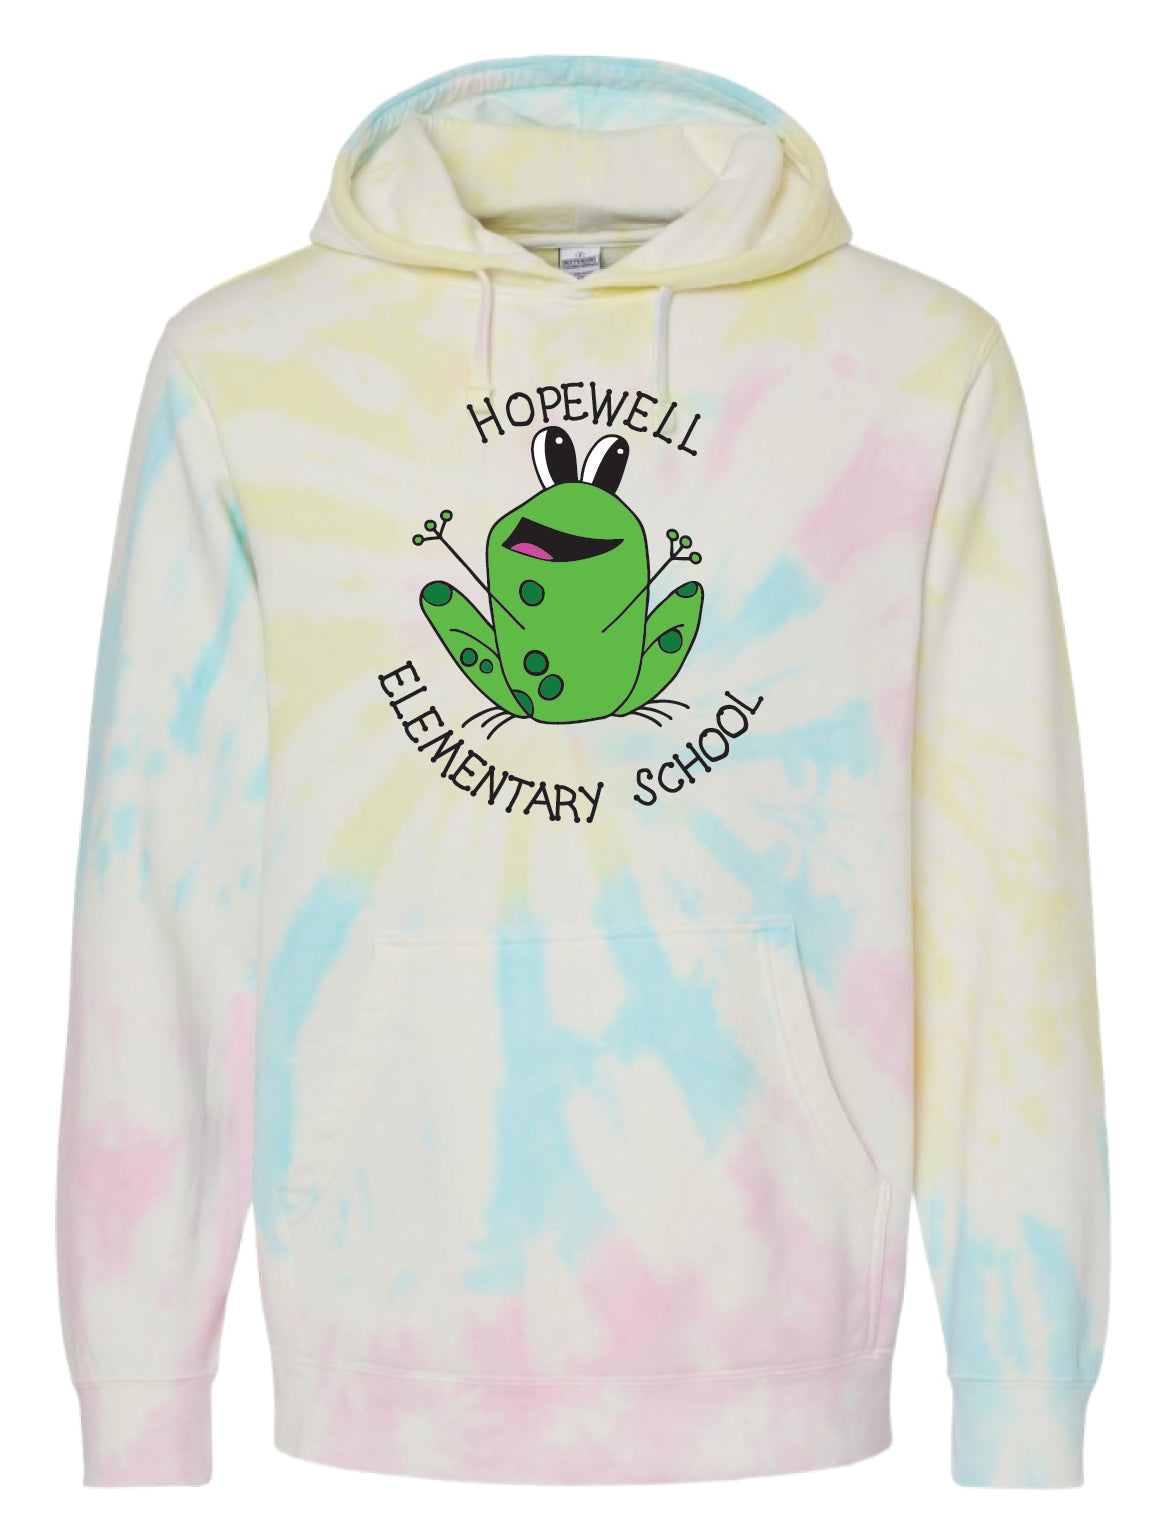 Hopewell Tie-Dye Pastel Hoodie- Adult and Youth